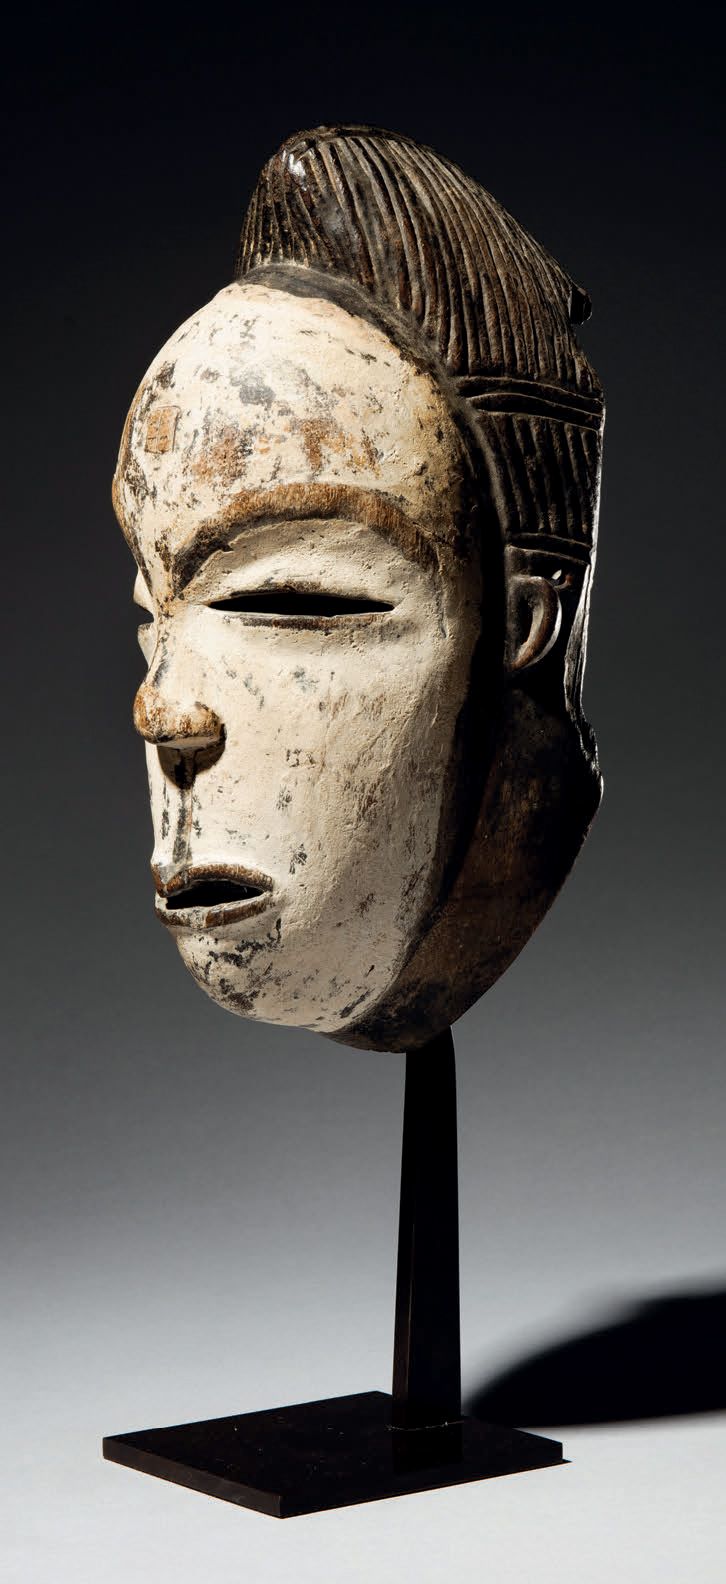 Null - NZEBI MASK, GABON
Wood
H. 28 cm
Very old mask showing a face covered with&hellip;